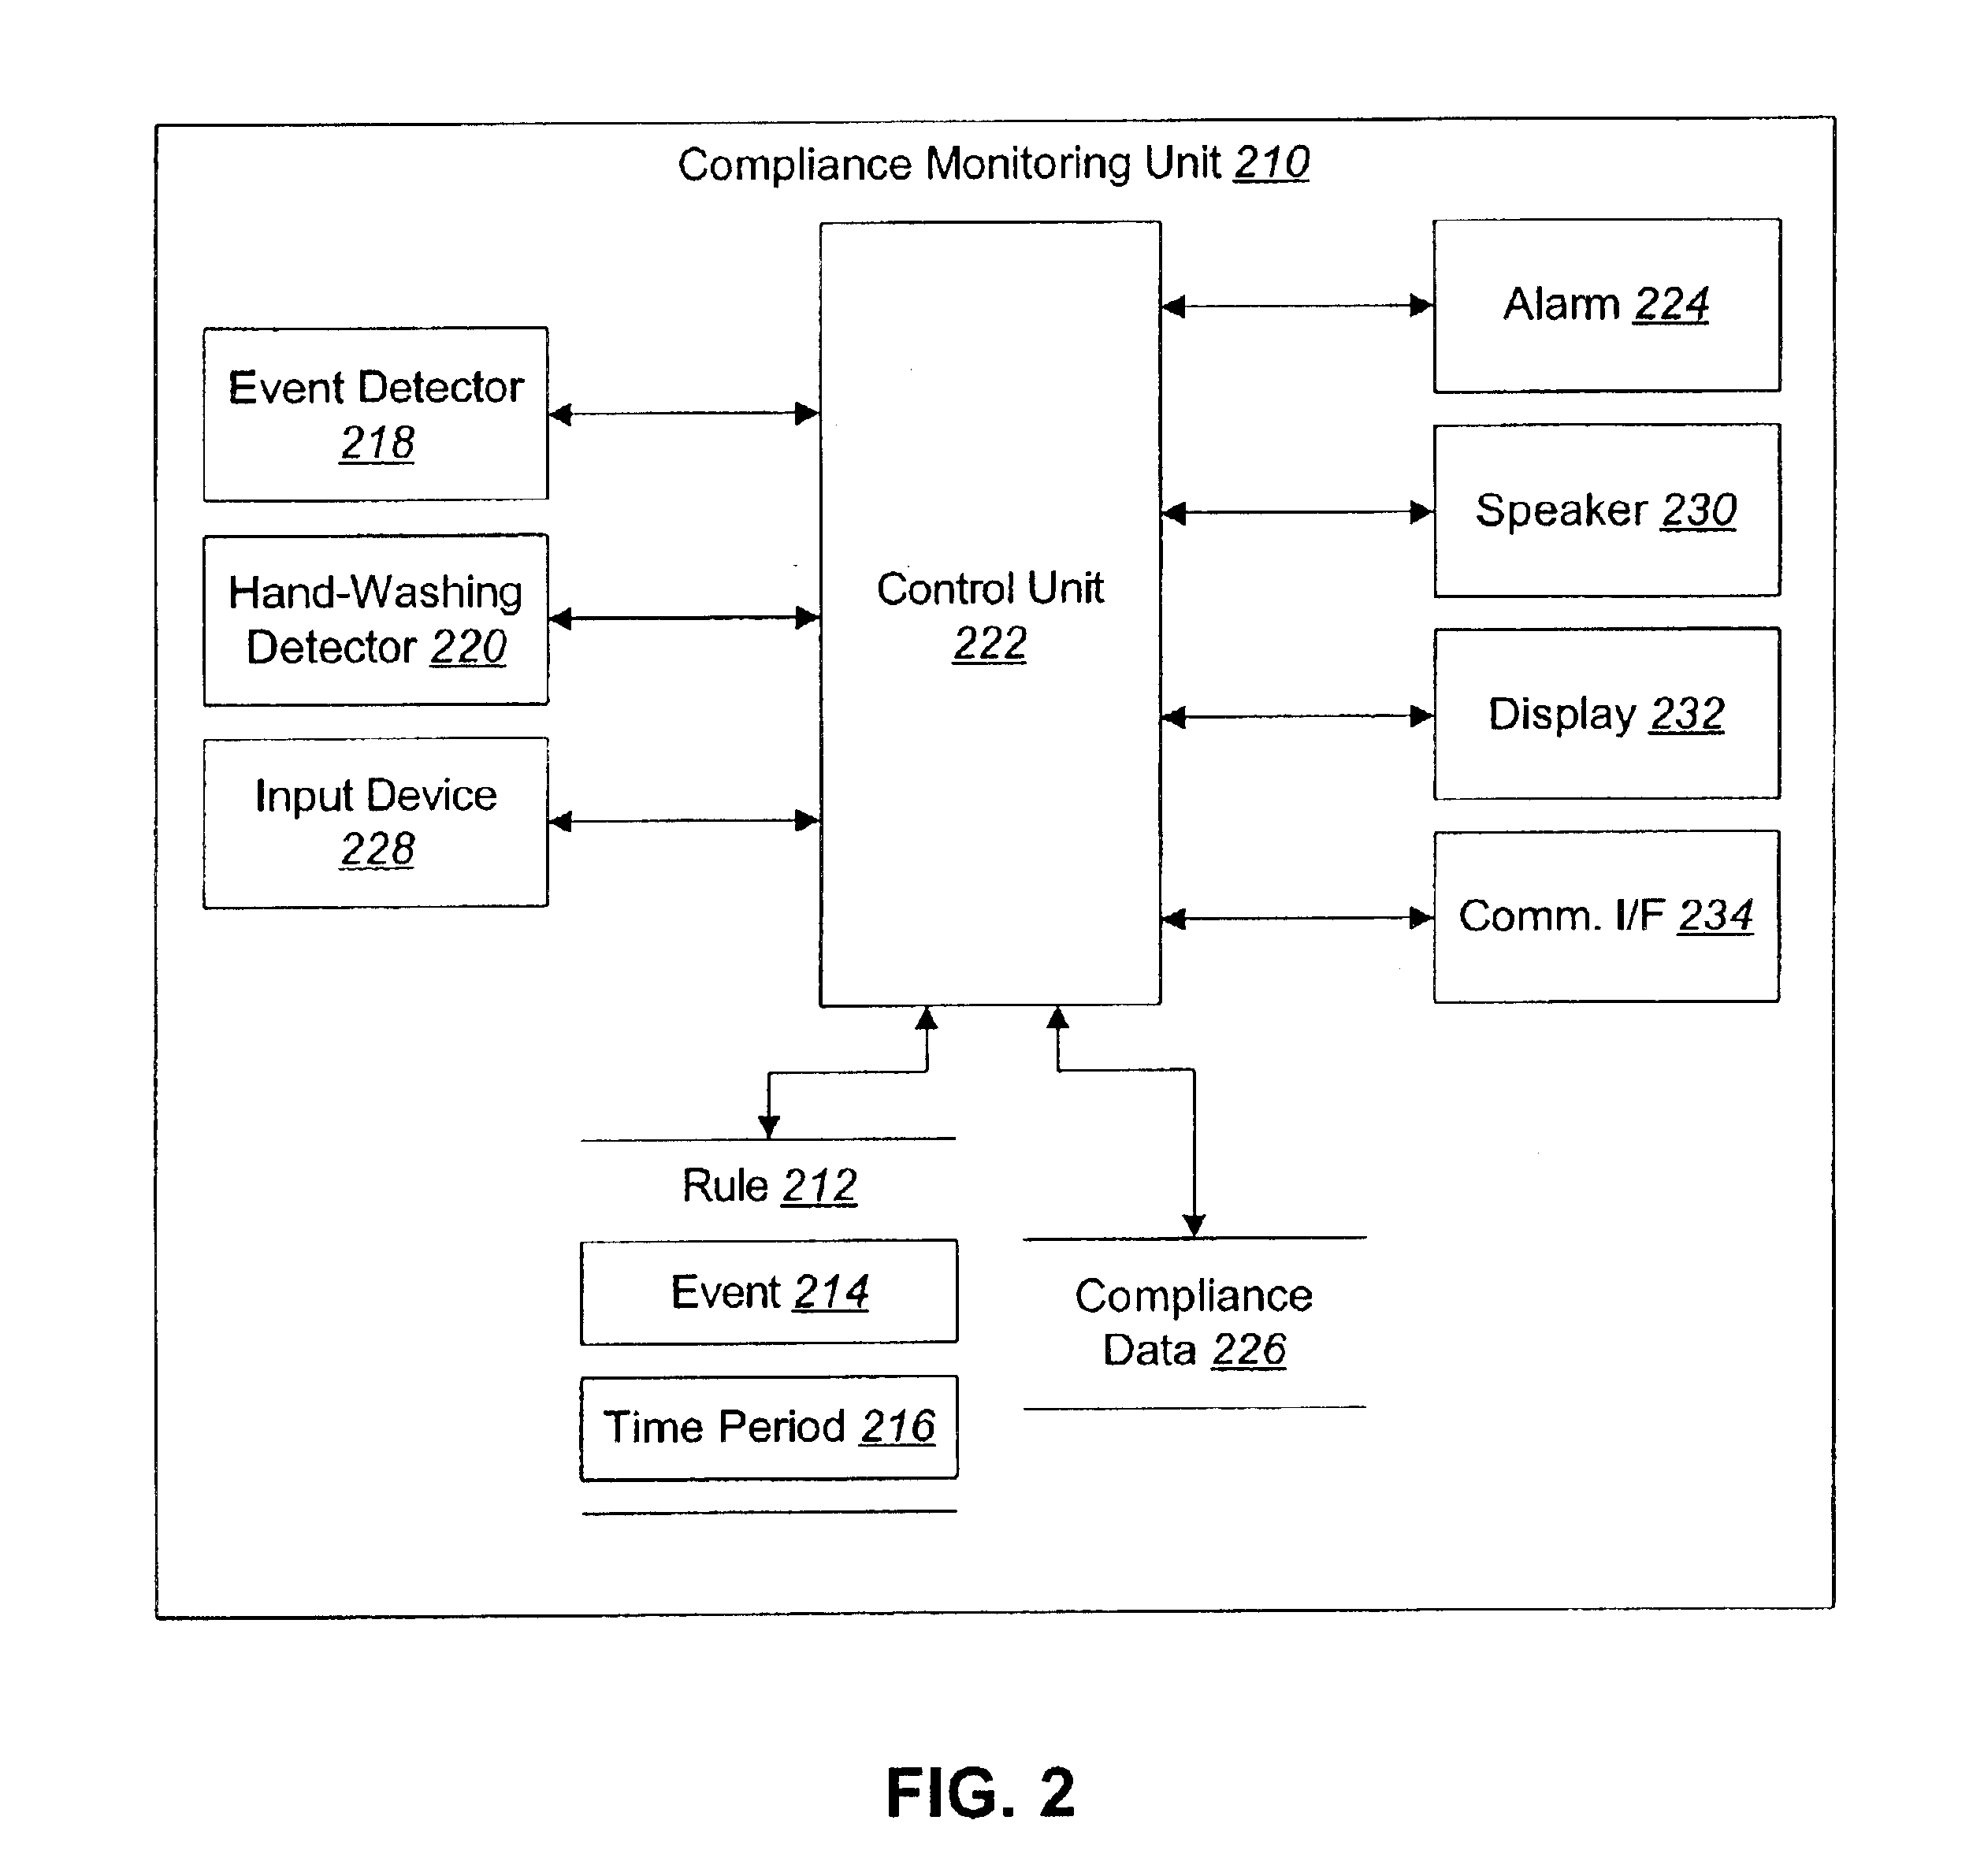 Apparatus and methods for monitoring compliance with recommended hand-washing practices